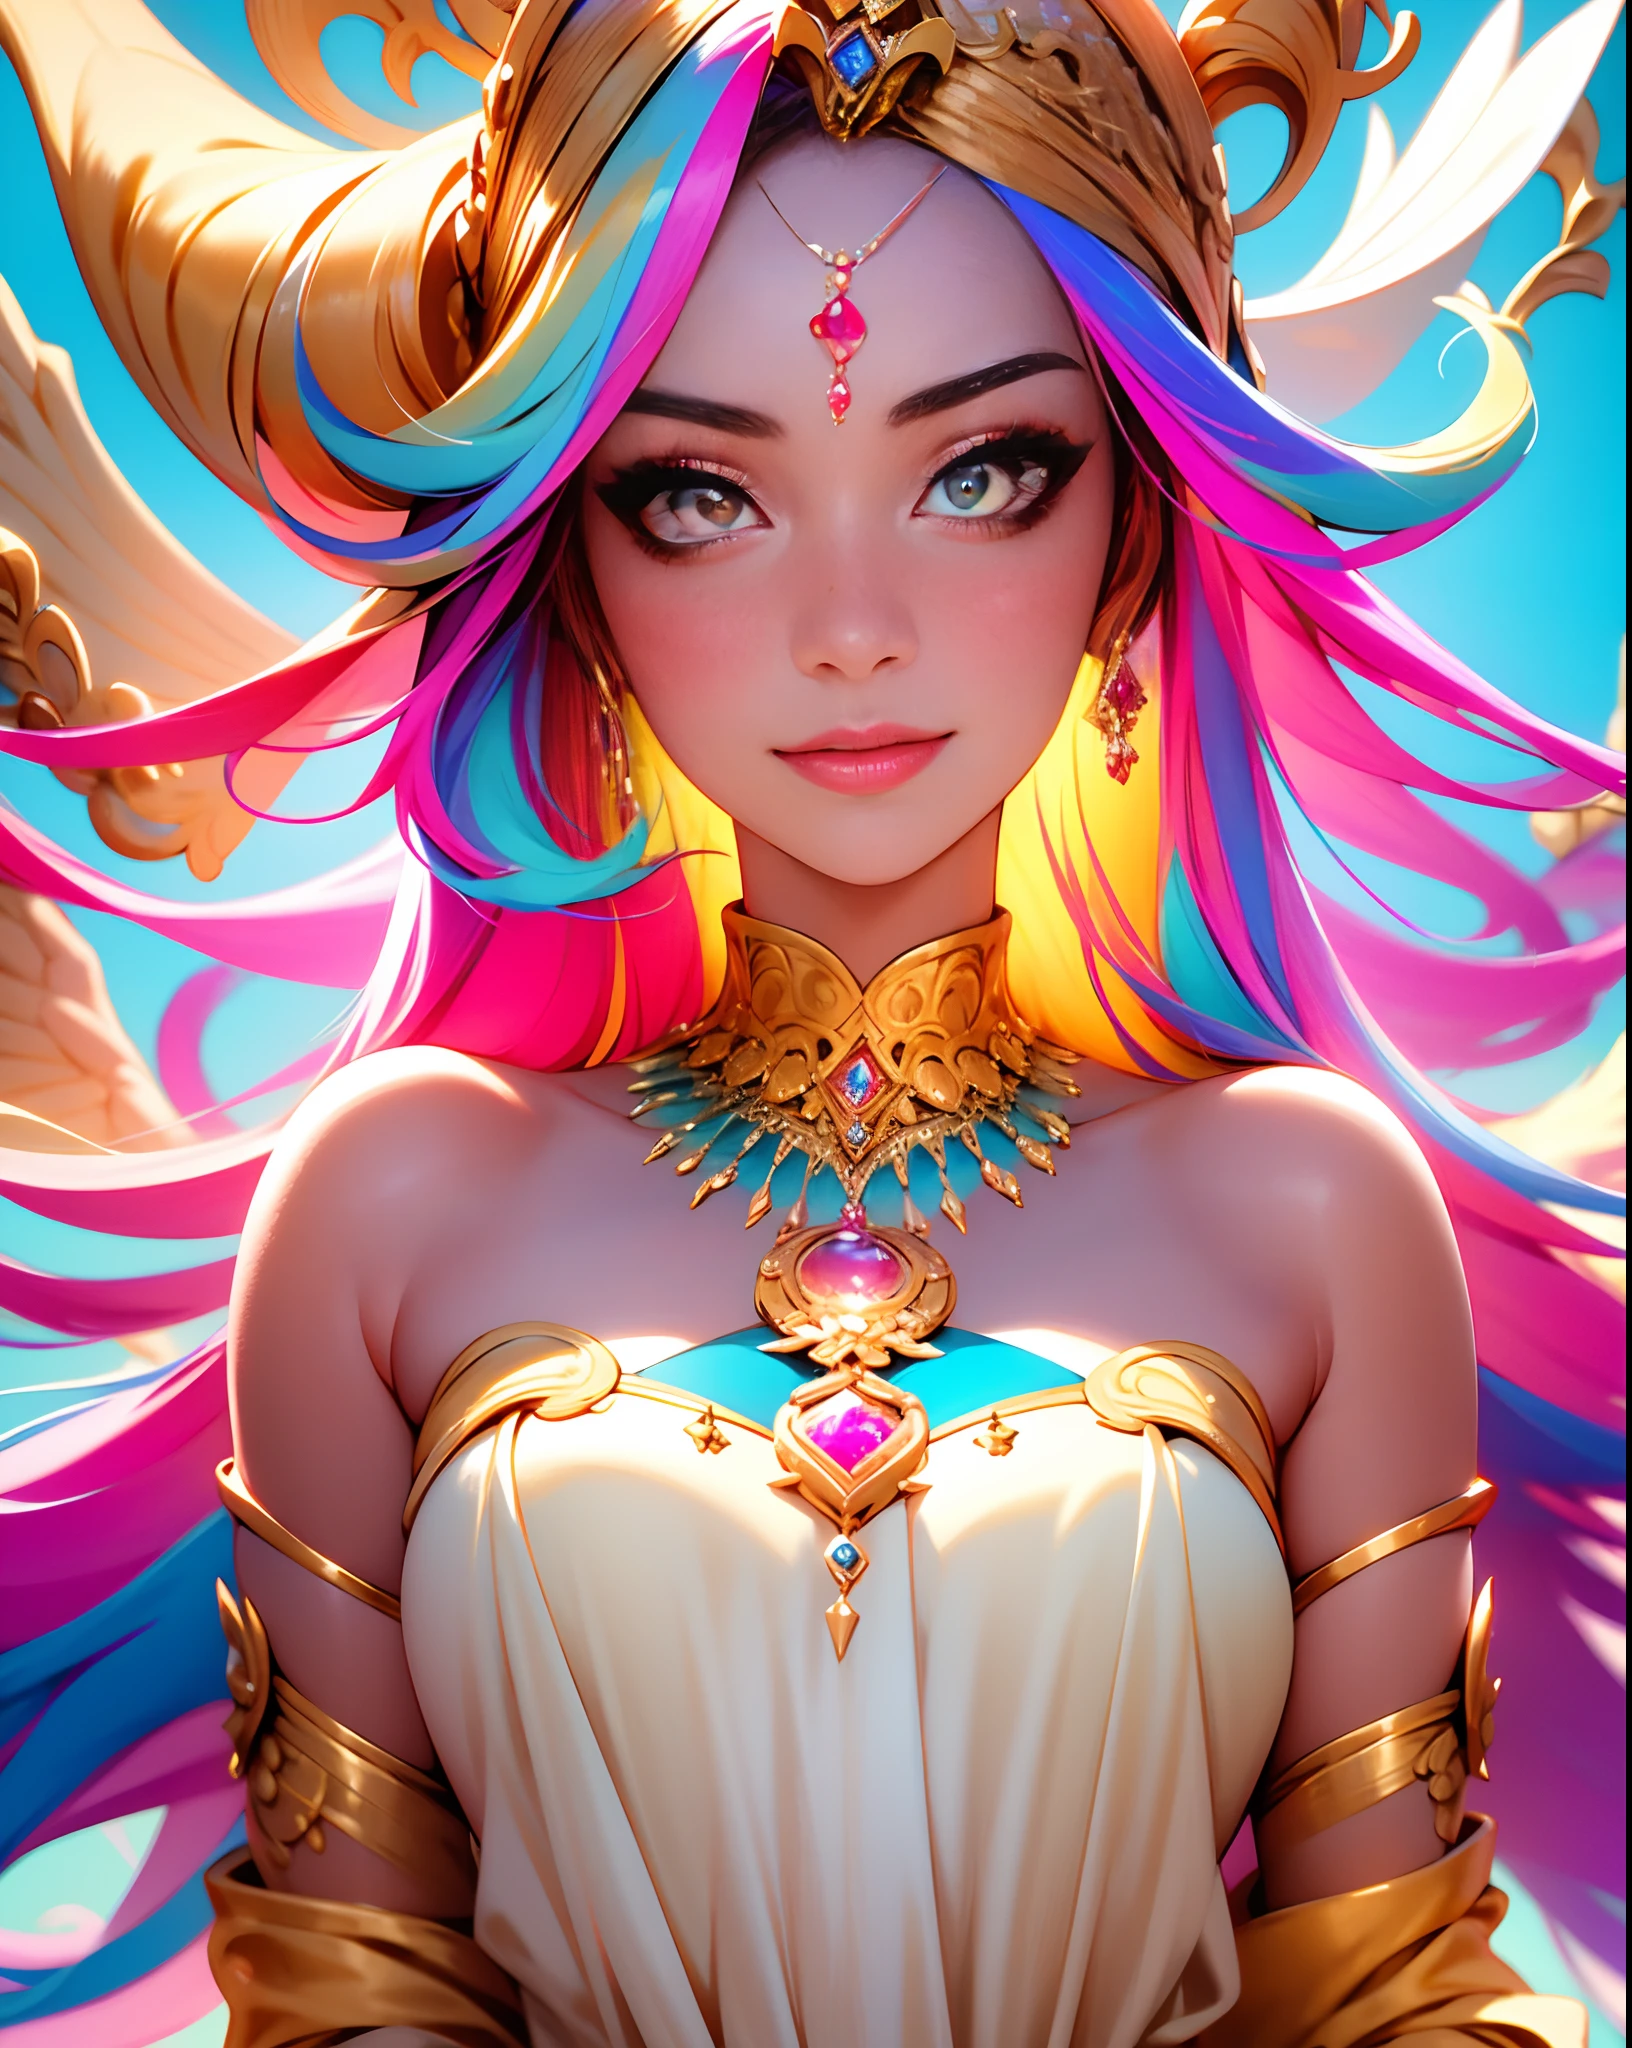 (highres,realistic) Gazing Goddess,mesmerizing gaze,charming beauty,divine aura,ethereal presence,flowing golden hair,pearlescent skin,shimmering gown,peaceful and tranquil expression,radiant smile,serene background,gentle sunlight,mystical atmosphere,vivid colors,supreme elegance,impeccable details,perfection in every feature,surreal beauty,artistic masterpiece,wonderful creation,dreamlike light,sublime artistry,exquisite craftsmanship,unforgettable impression,artistic finesse,subtle nuances,lifelike depiction,divine goddess presence,graceful posture,delicate facial features,enchanted by her beauty,gem like eyes, glowing eye, jewellery, full body view,((colourful hair 1.6)),((colourful eyes 1.6